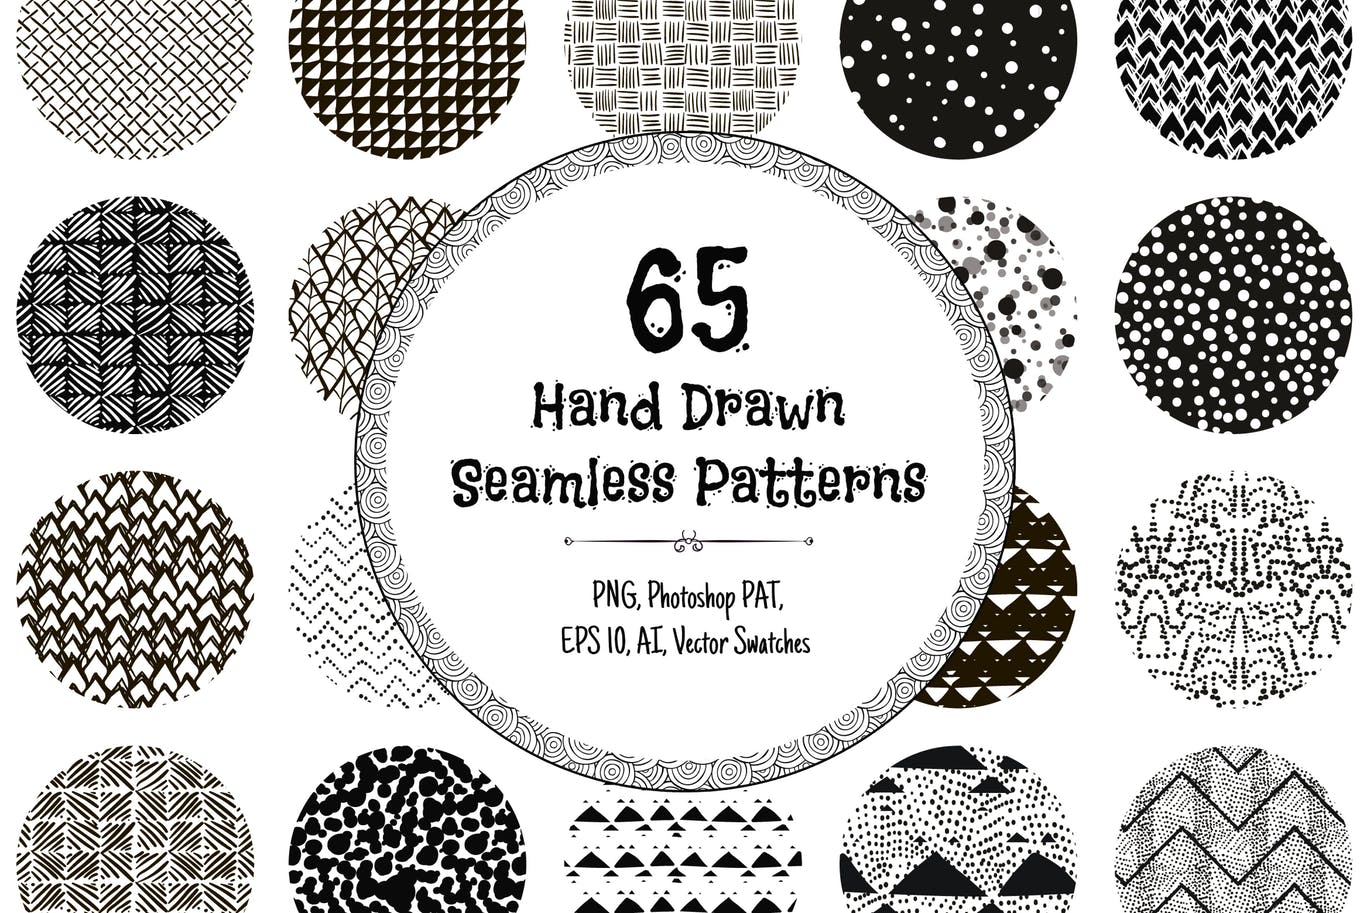 A bunch of hand drawn patterns